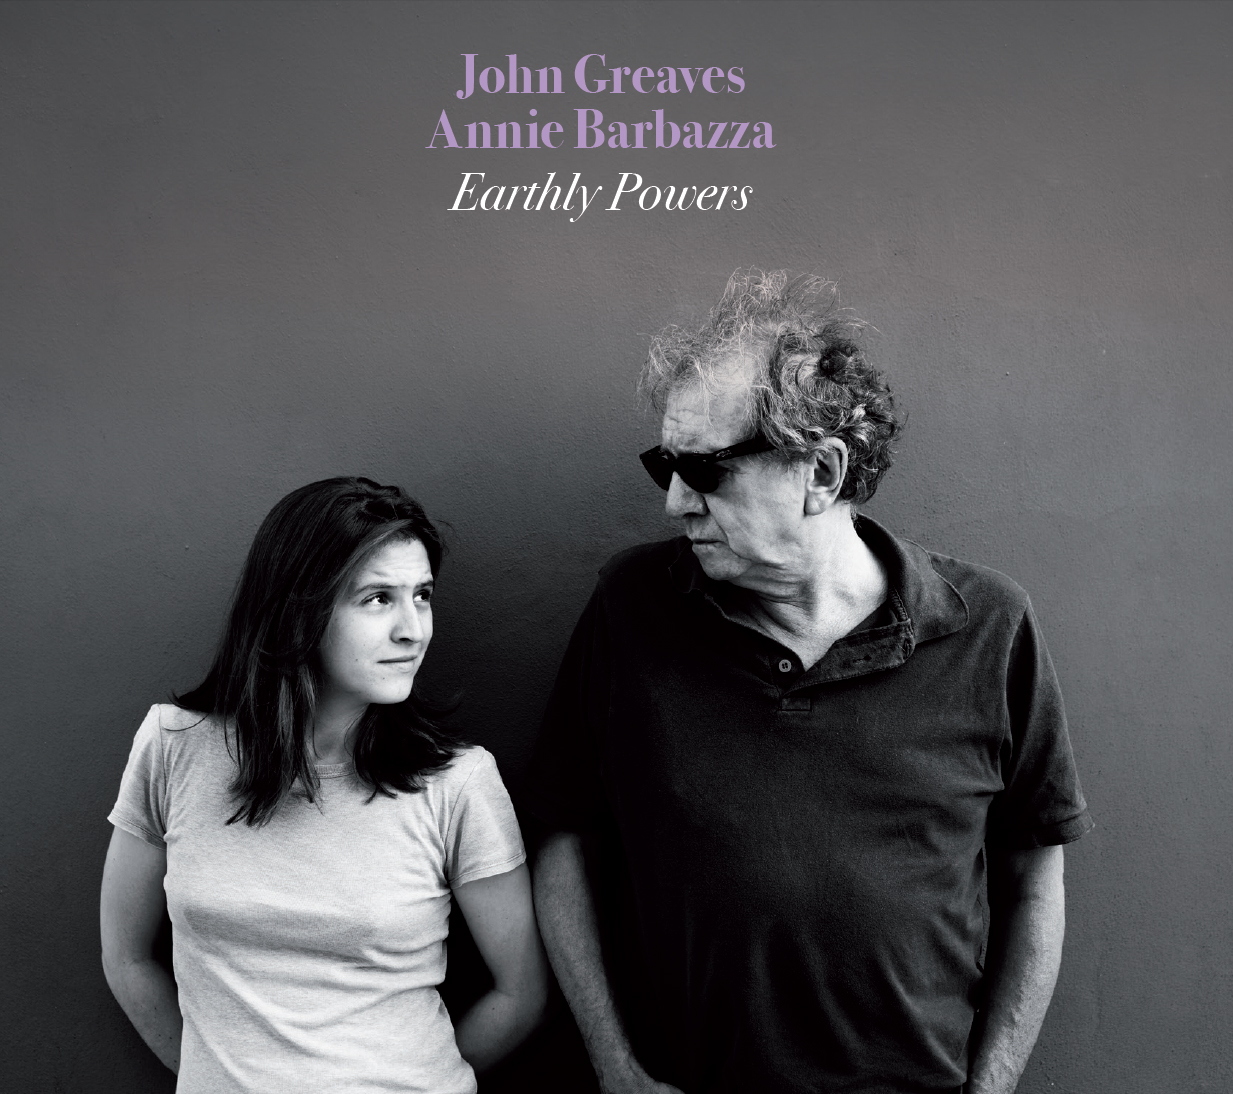 GREAVES JOHN/BARBAZZA ANNIE - Earthly Powers